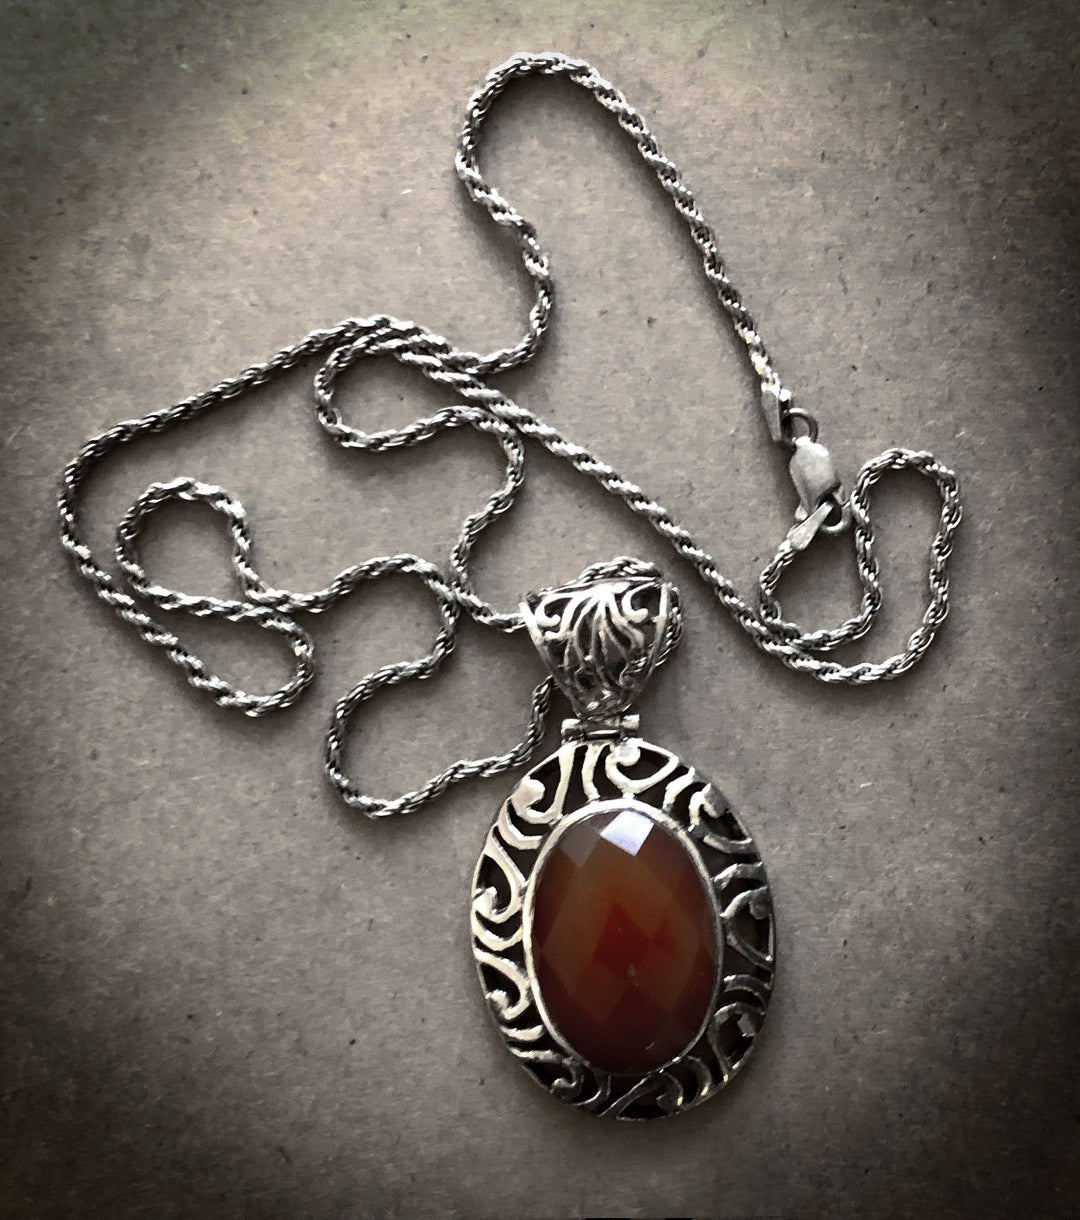 Faceted Large Carnelian Pendant set in 925 Sterling Silver with 925 20" Silver Rope Chain